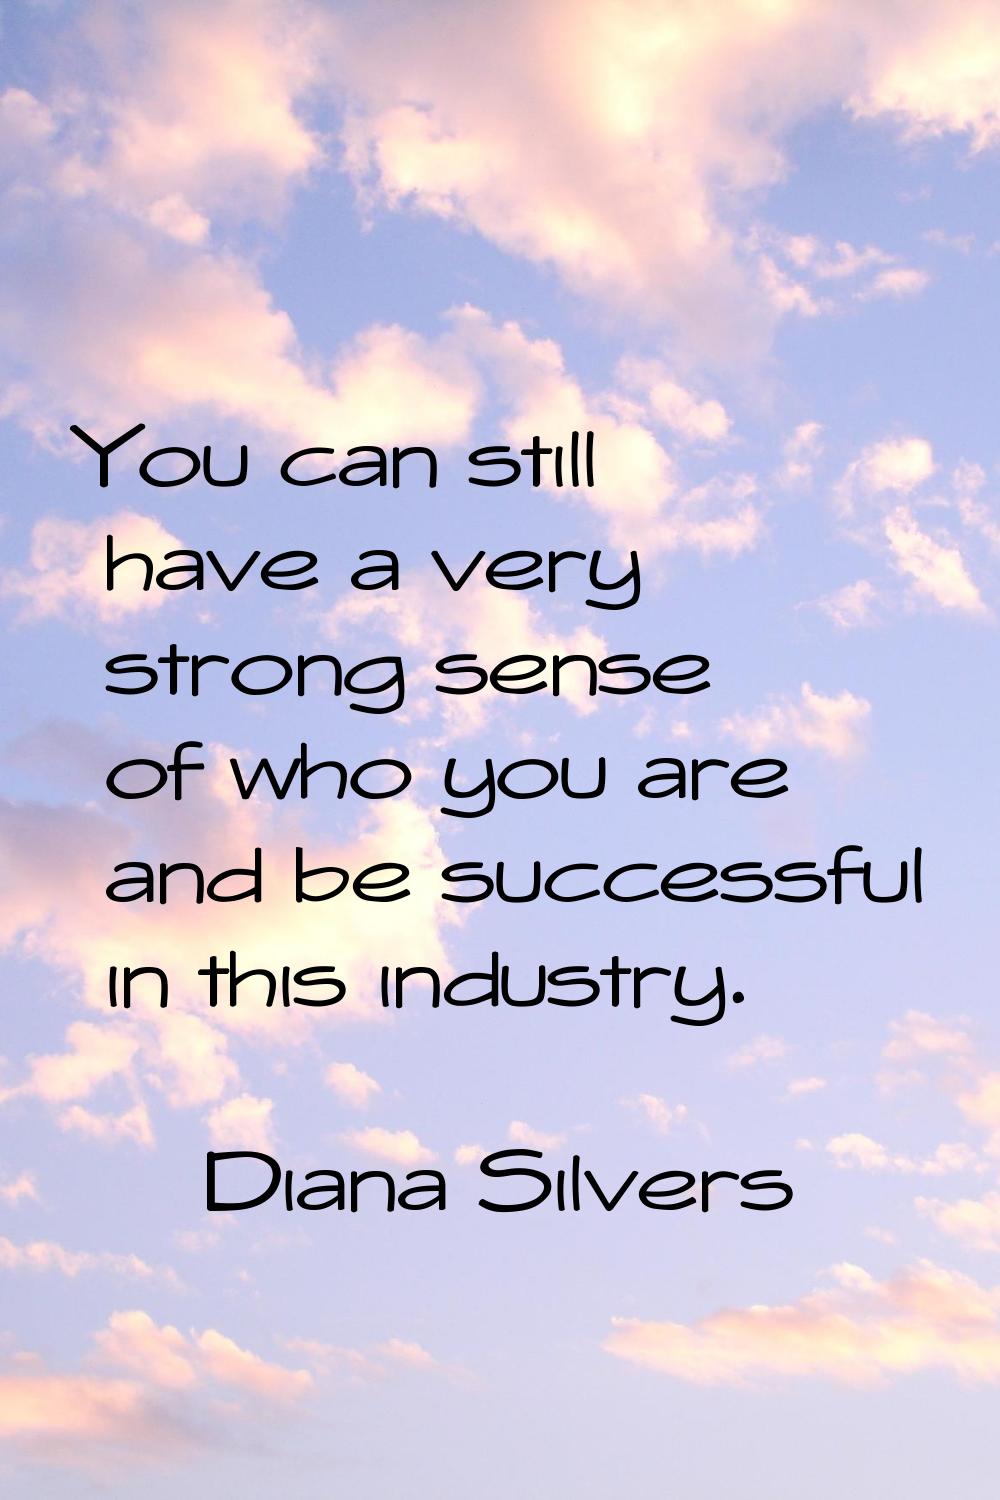 You can still have a very strong sense of who you are and be successful in this industry.